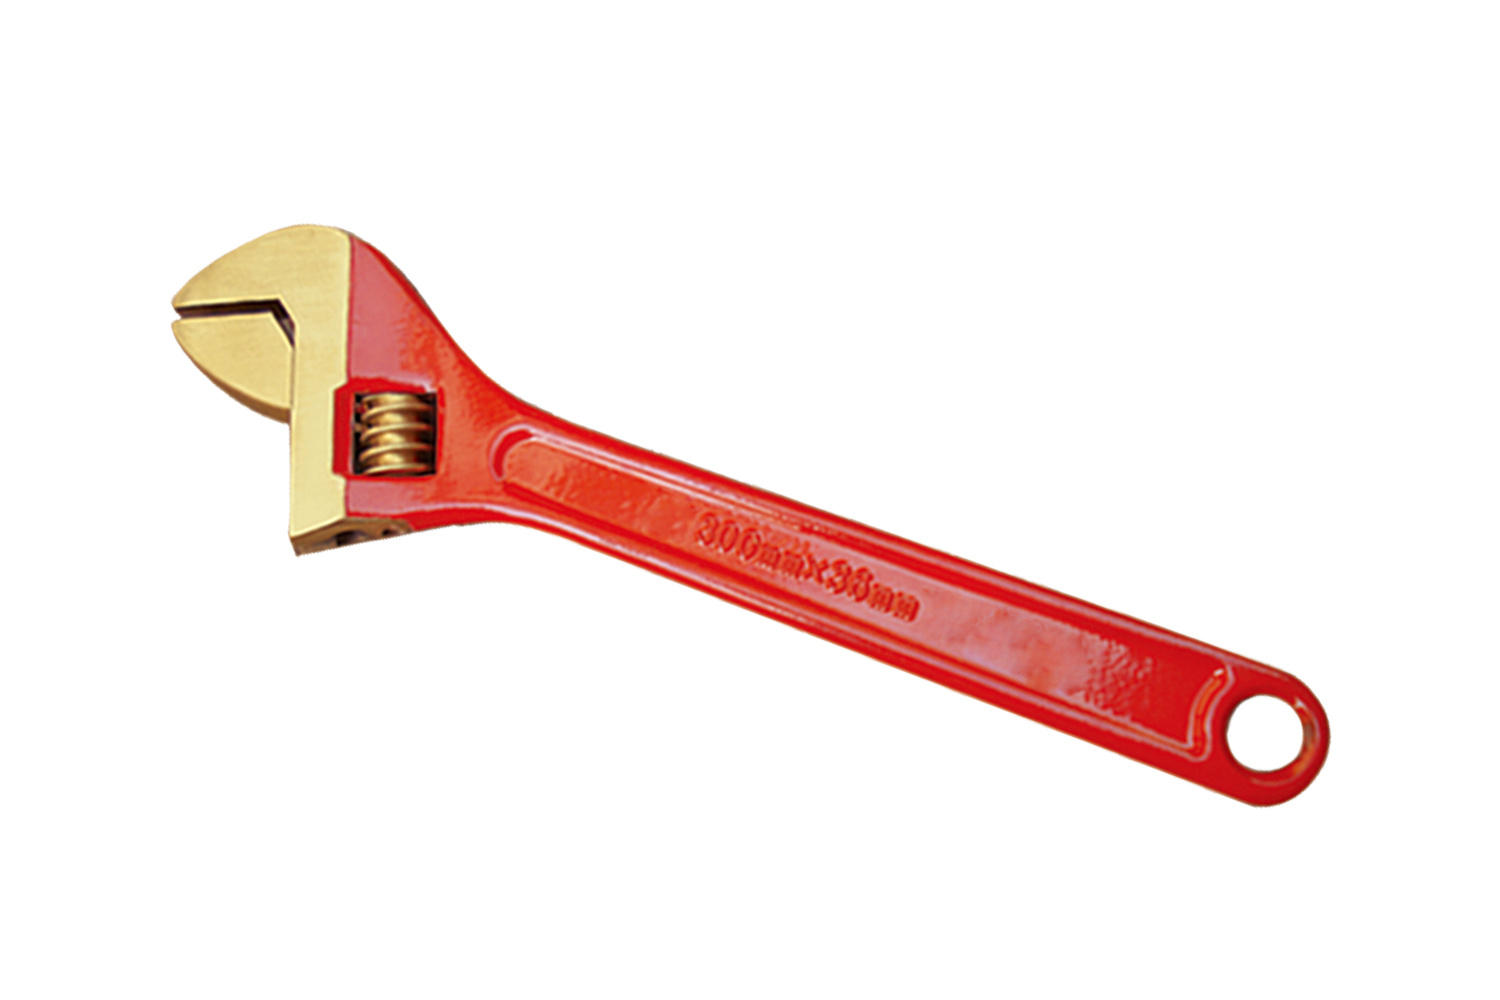 Prominent advantages of hand wrenches in explosion-proof tools